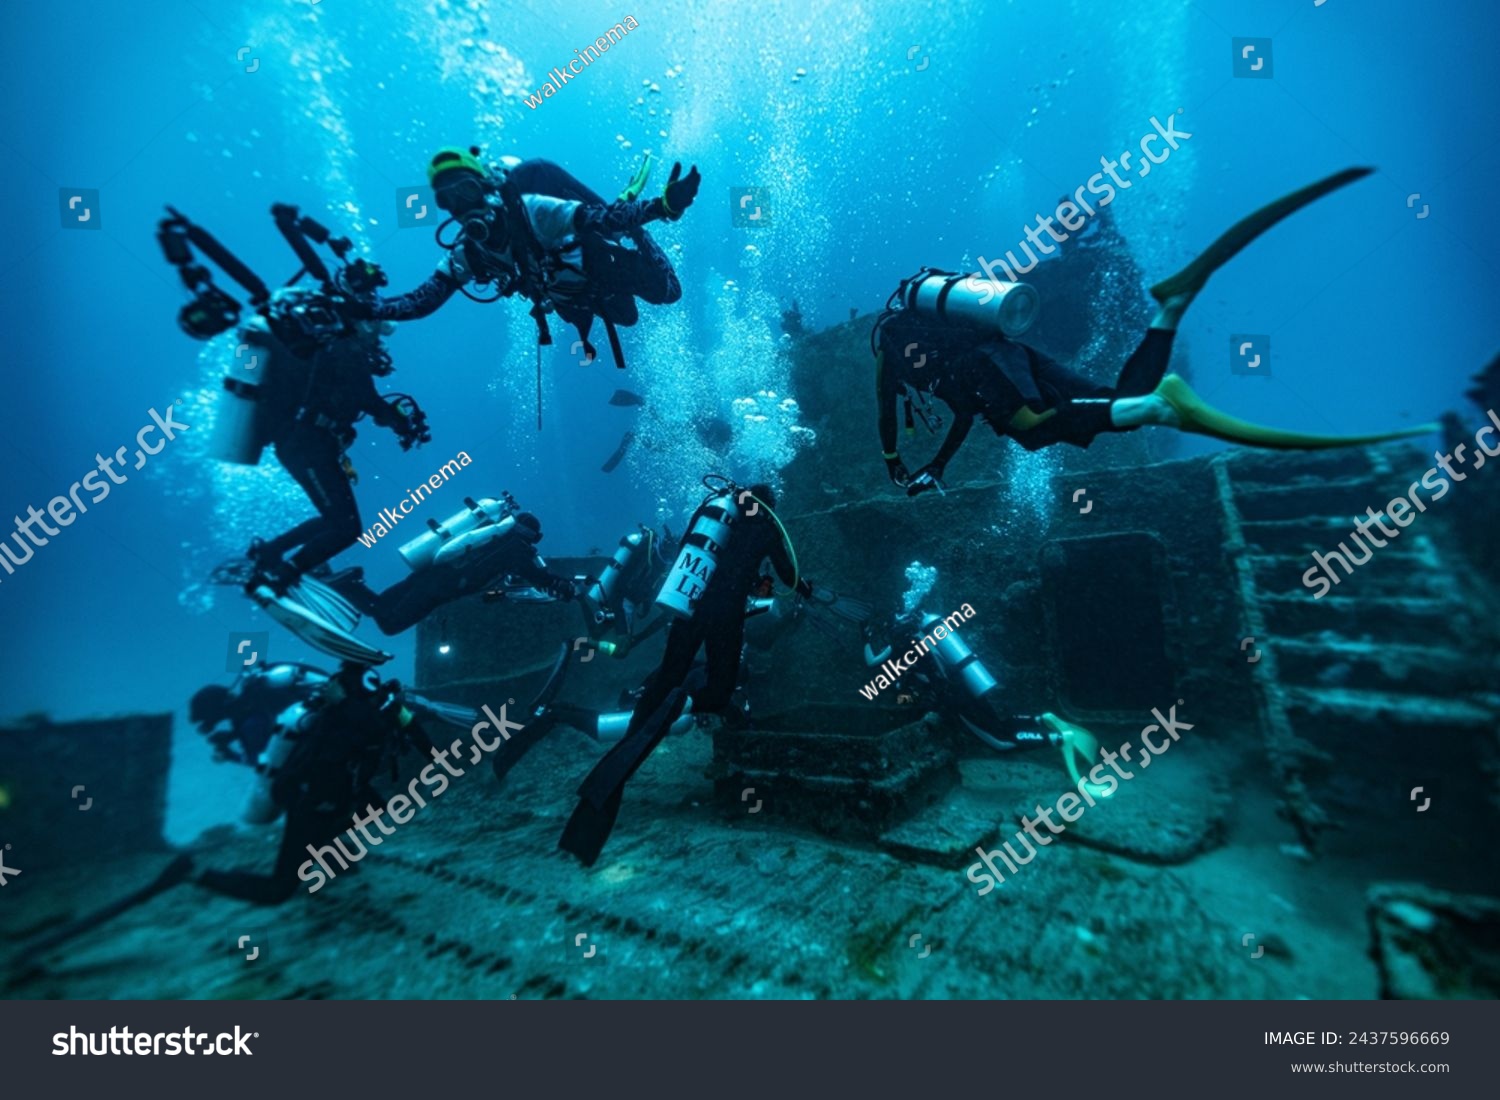 This photo is about scuba diving in the Maldives Islands. Starting from Male Airport, the photos range from underwater shots to mermaid shots by boat. This photo is about scuba diving in the Maldives #2437596669